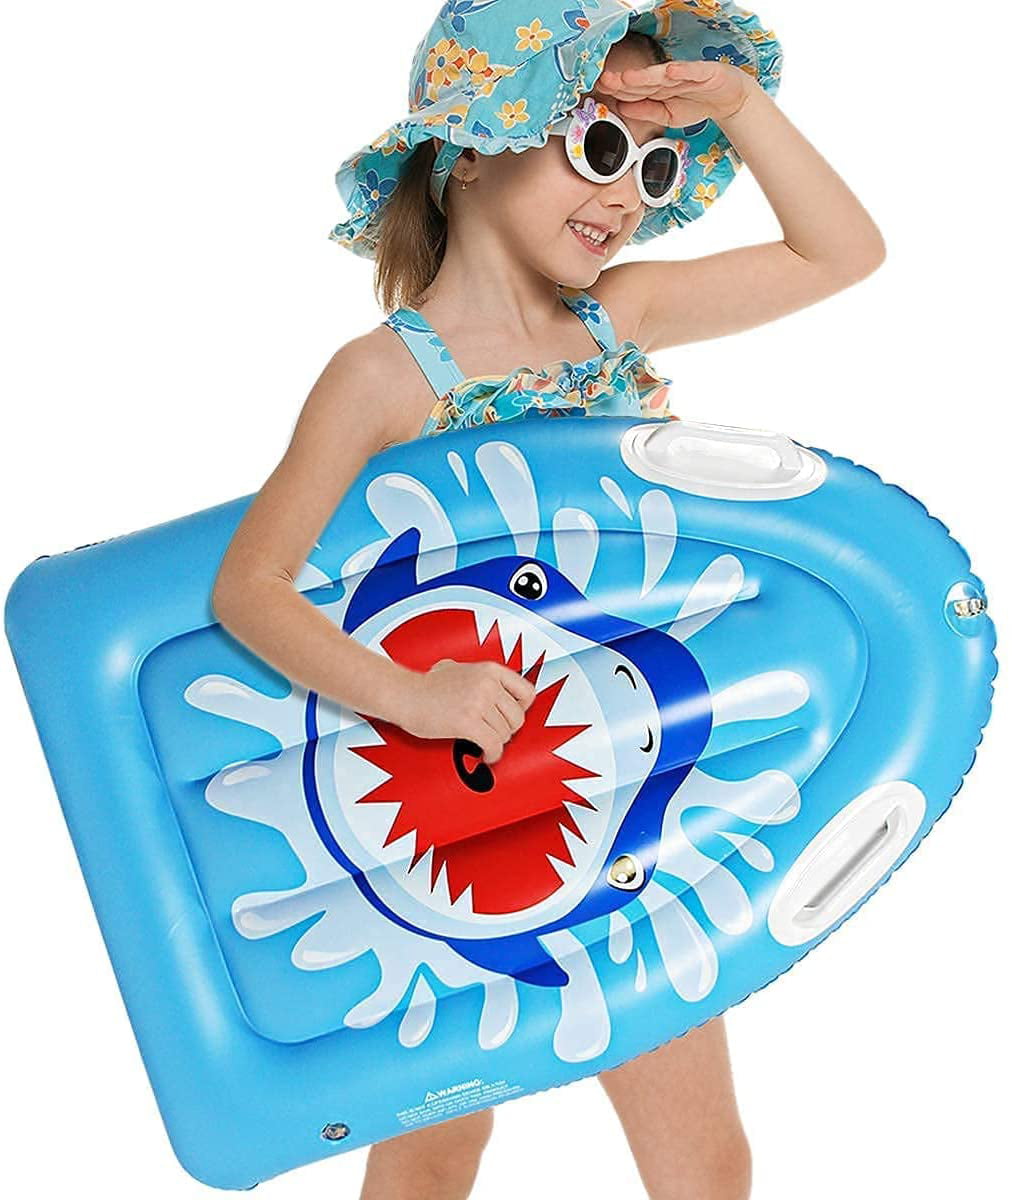 Inflatable Surfboard Inflatable Floating Rafts Portable Safe Swim Paddle with Handle for Kids Water Sports Equipment Lake Blue 1 Pc 